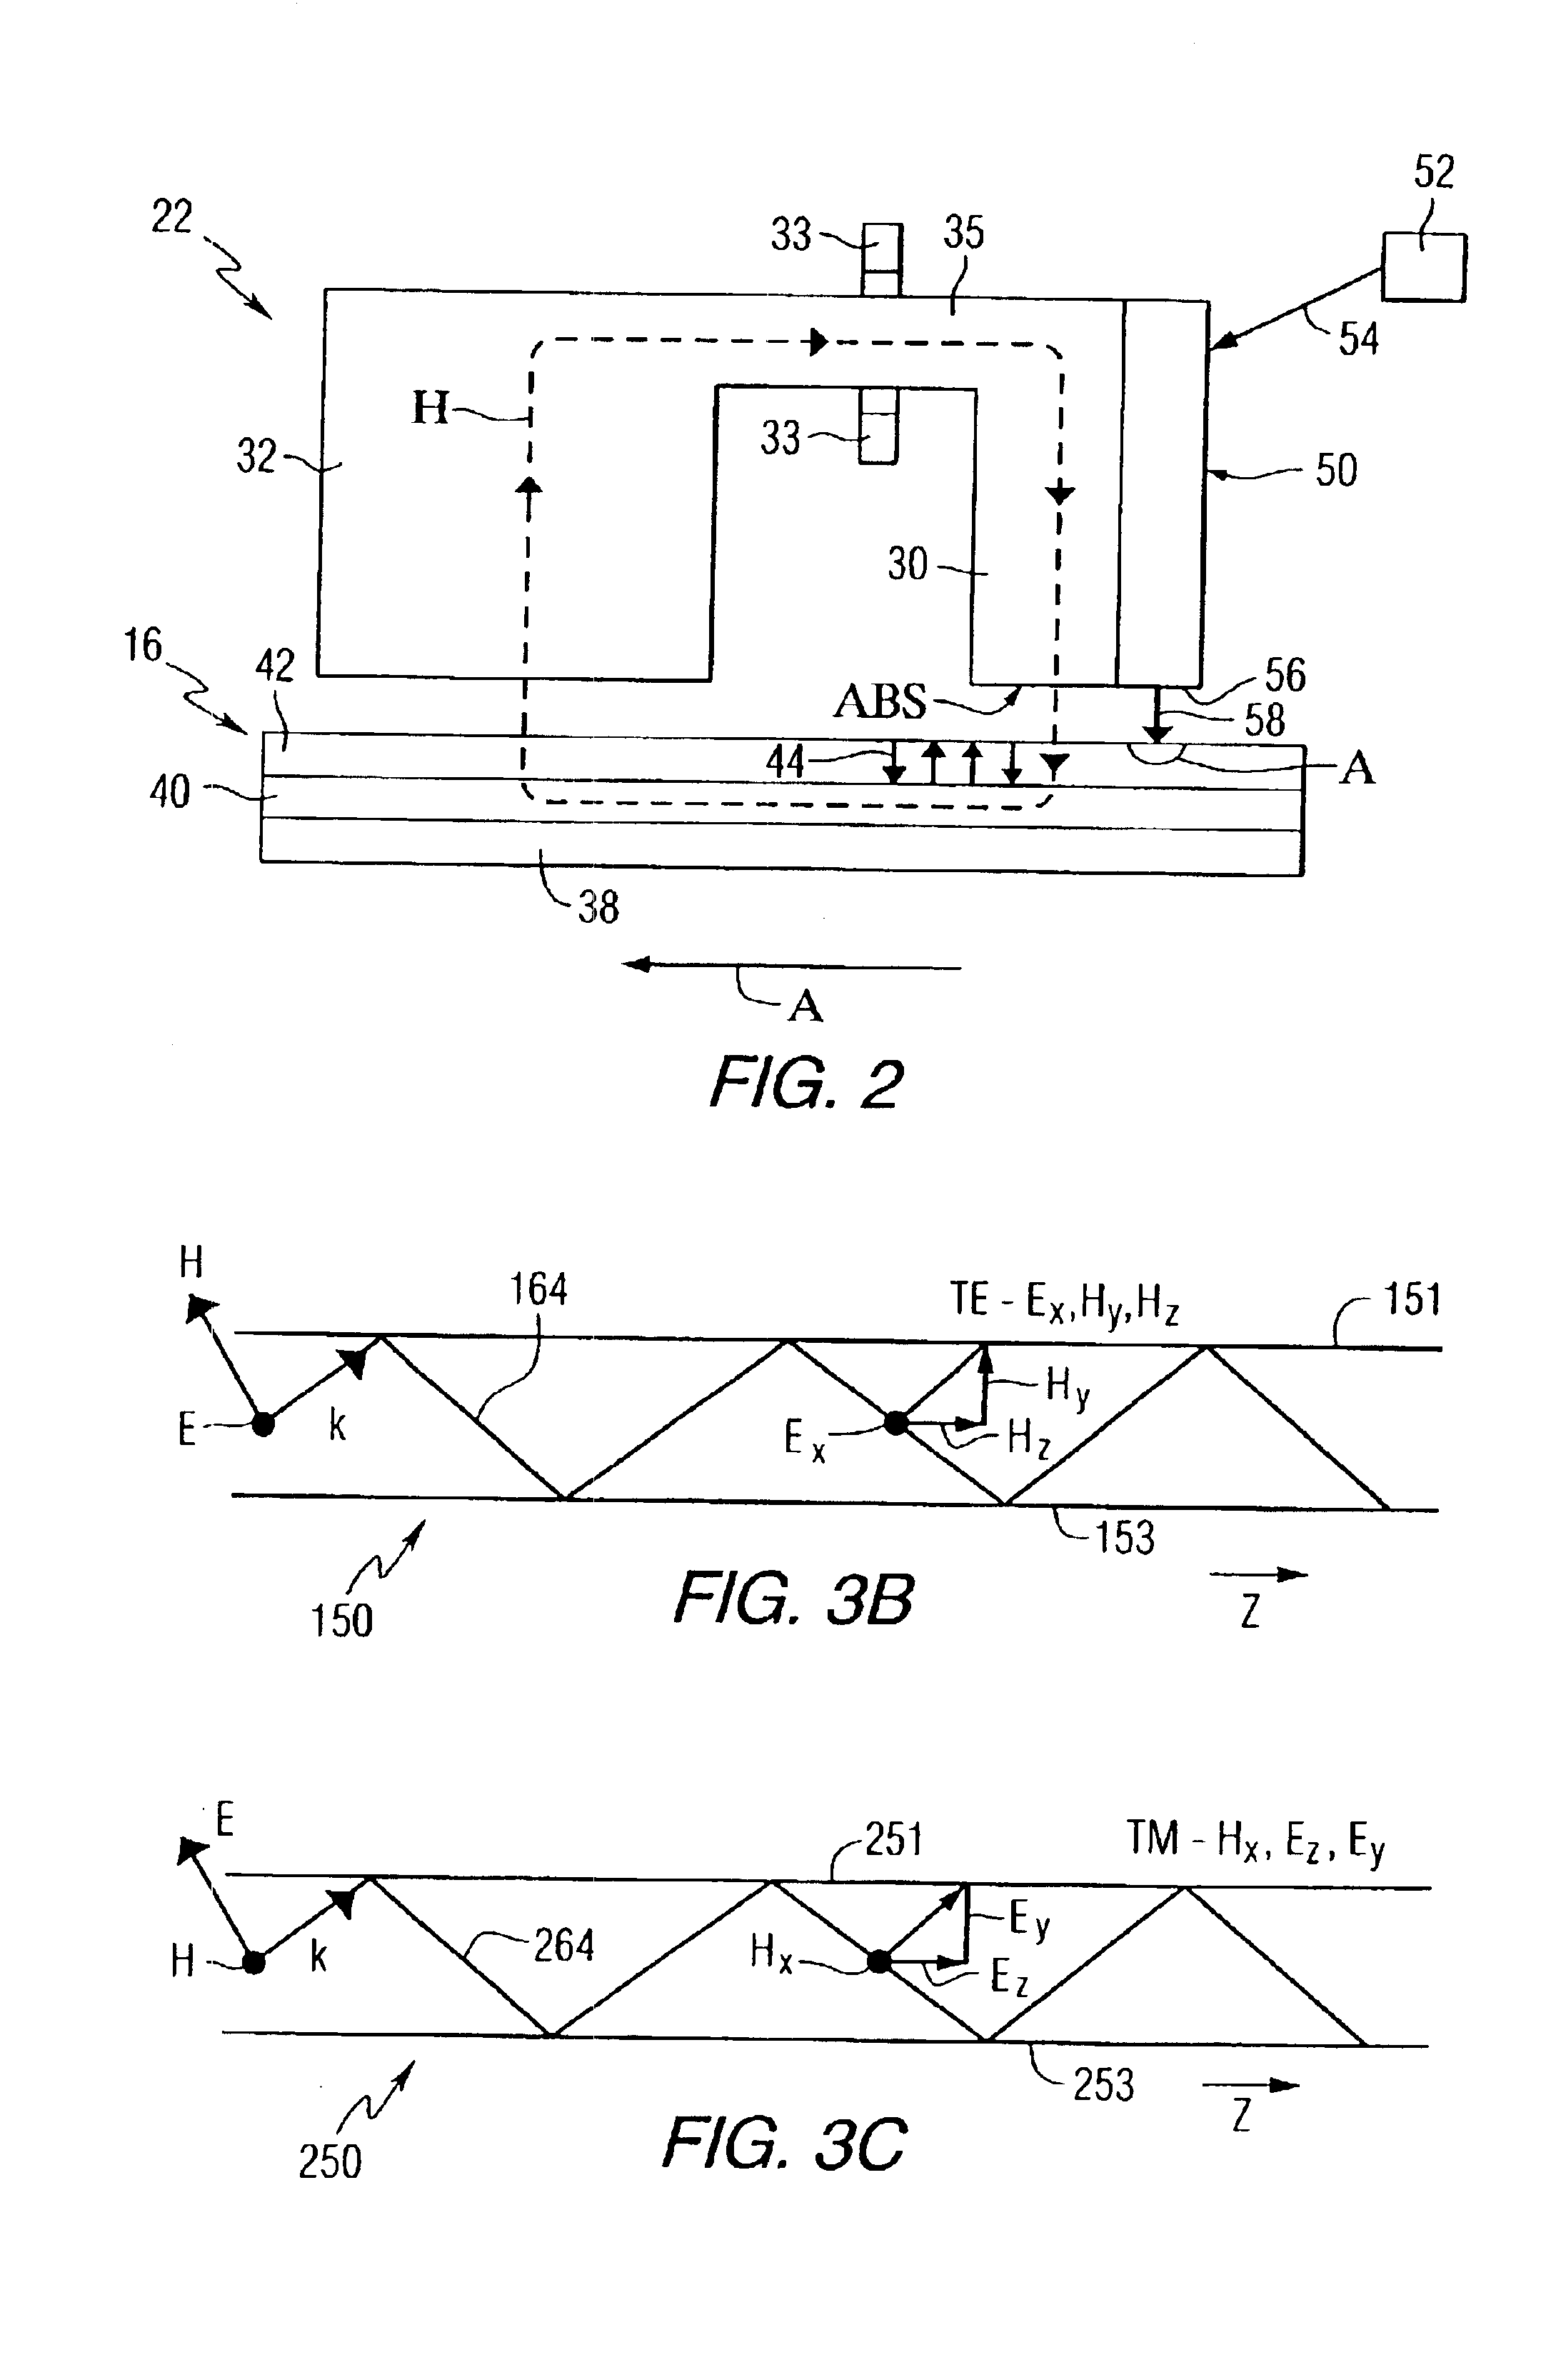 Heat assisted magnetic recording head with a planar waveguide